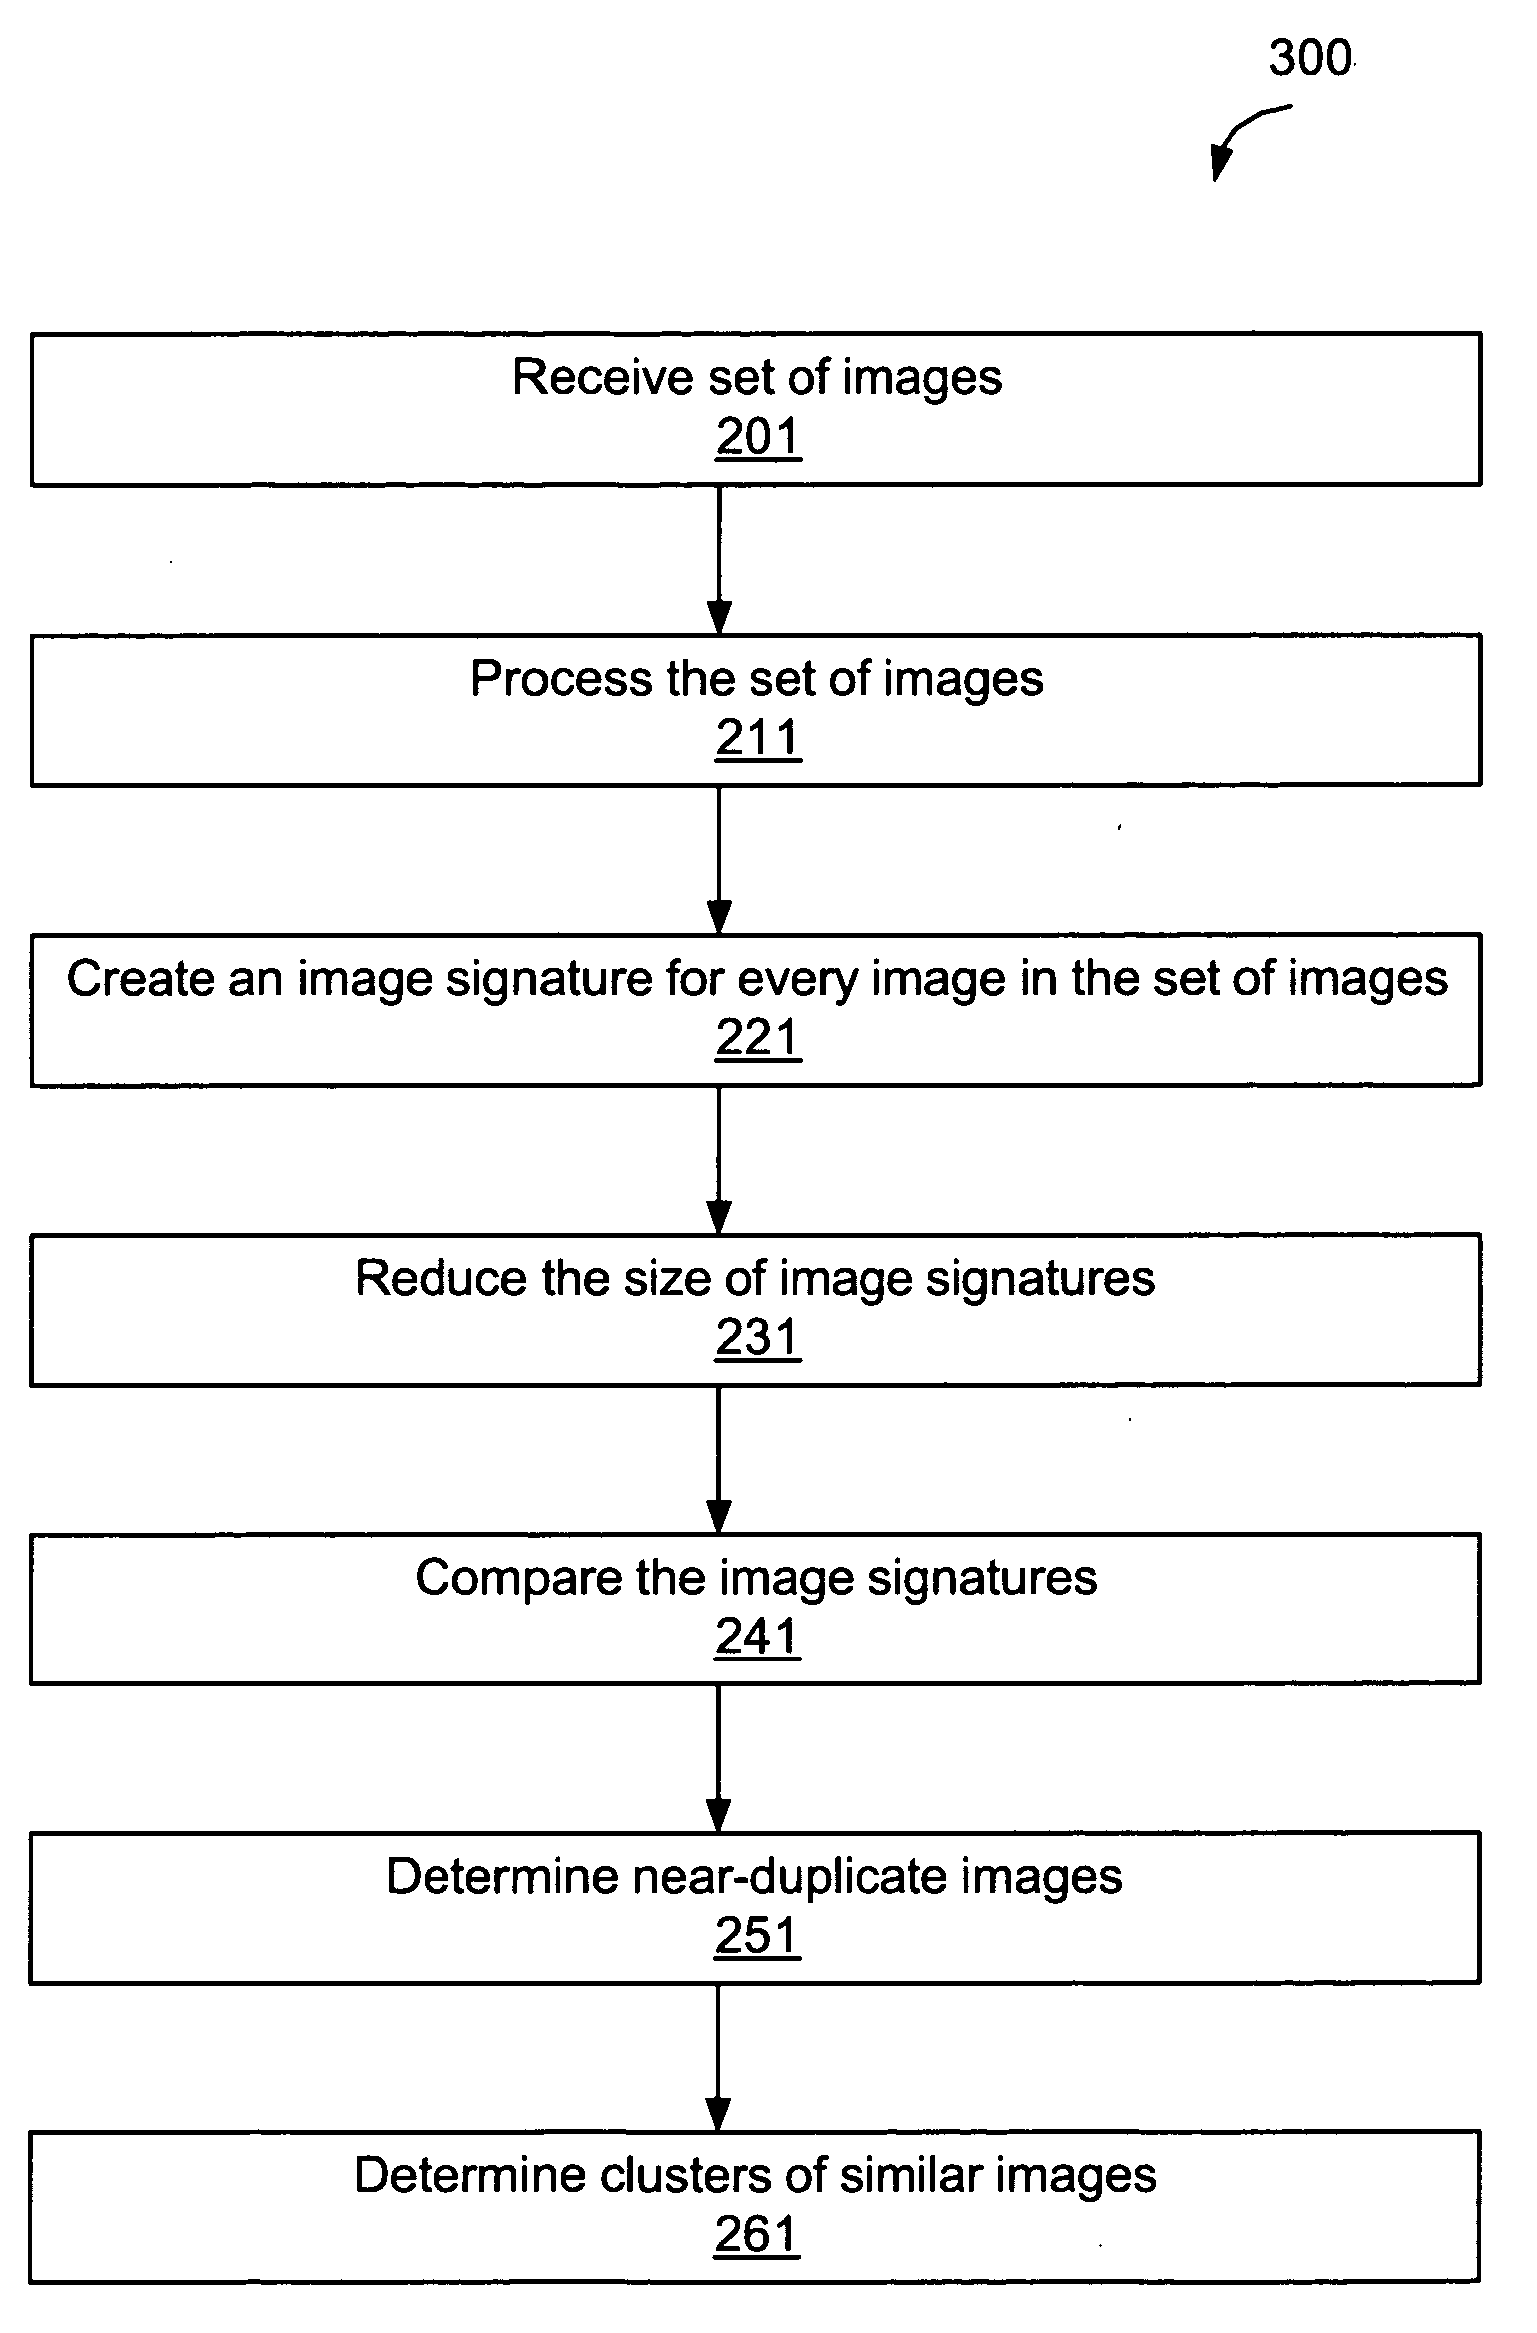 Similarity detection and clustering of images